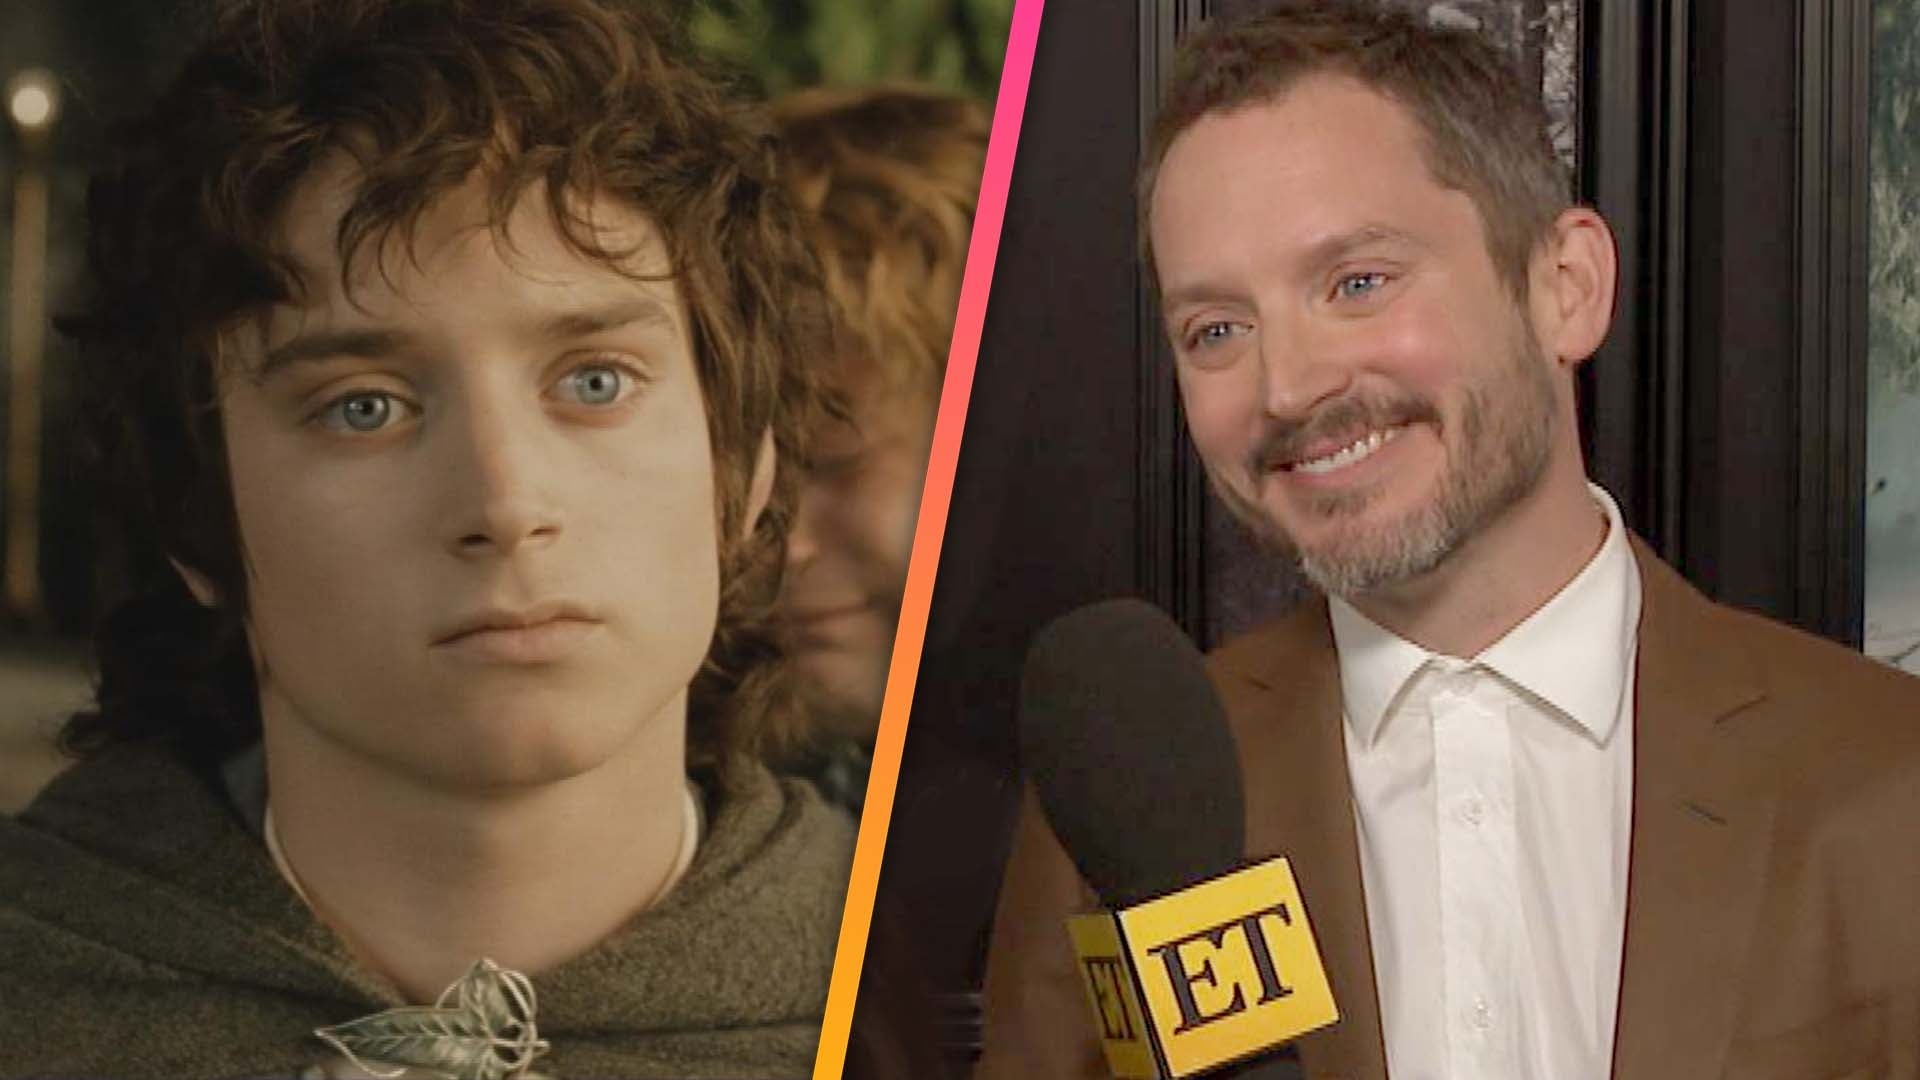 Lord of the Rings stars reflect on film for 20th anniversary